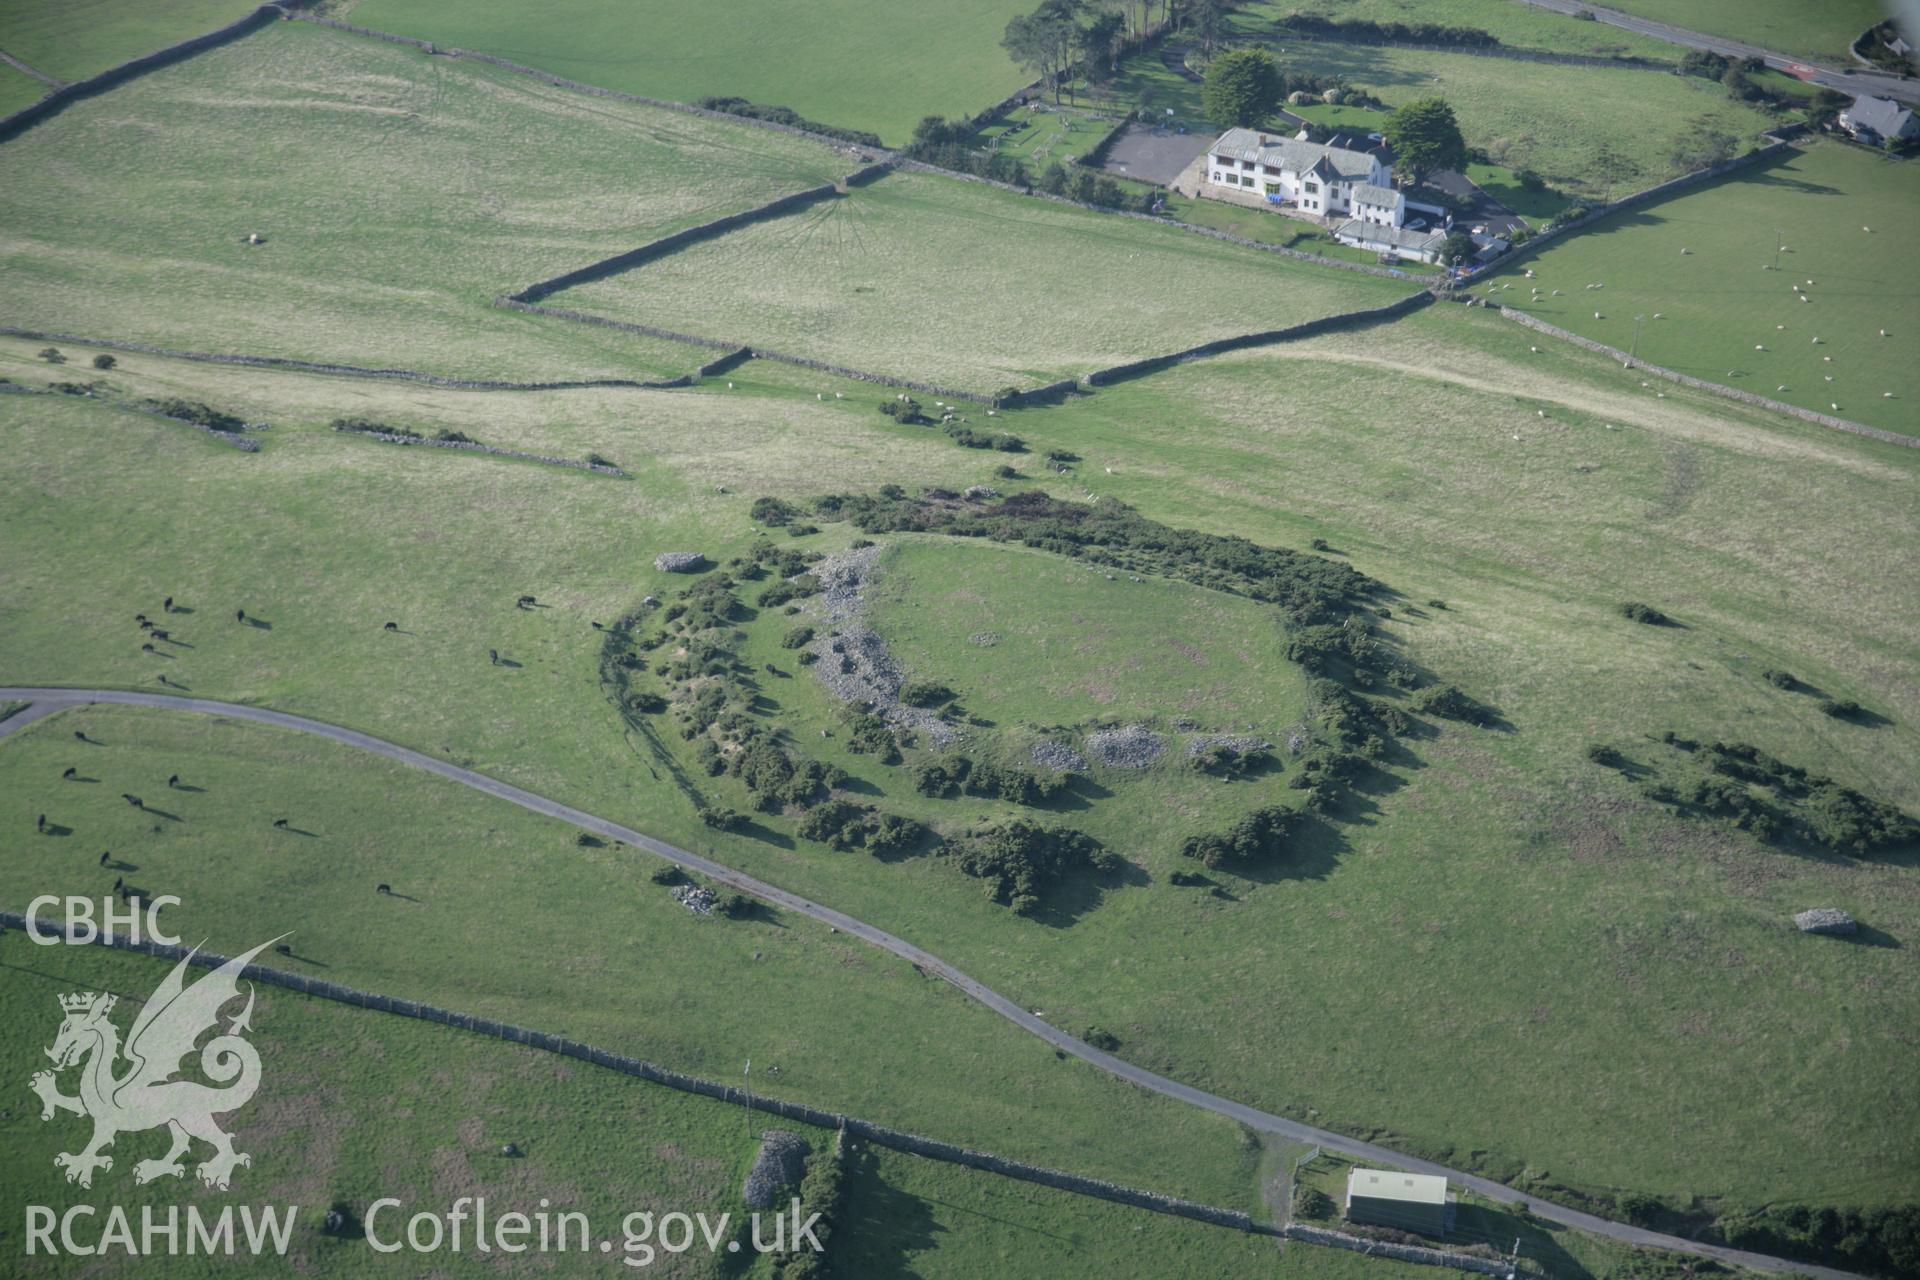 RCAHMW colour oblique aerial photograph of Castell-y-Gaer and nearby field systems. Viewed from the east. Taken on 17 October 2005 by Toby Driver